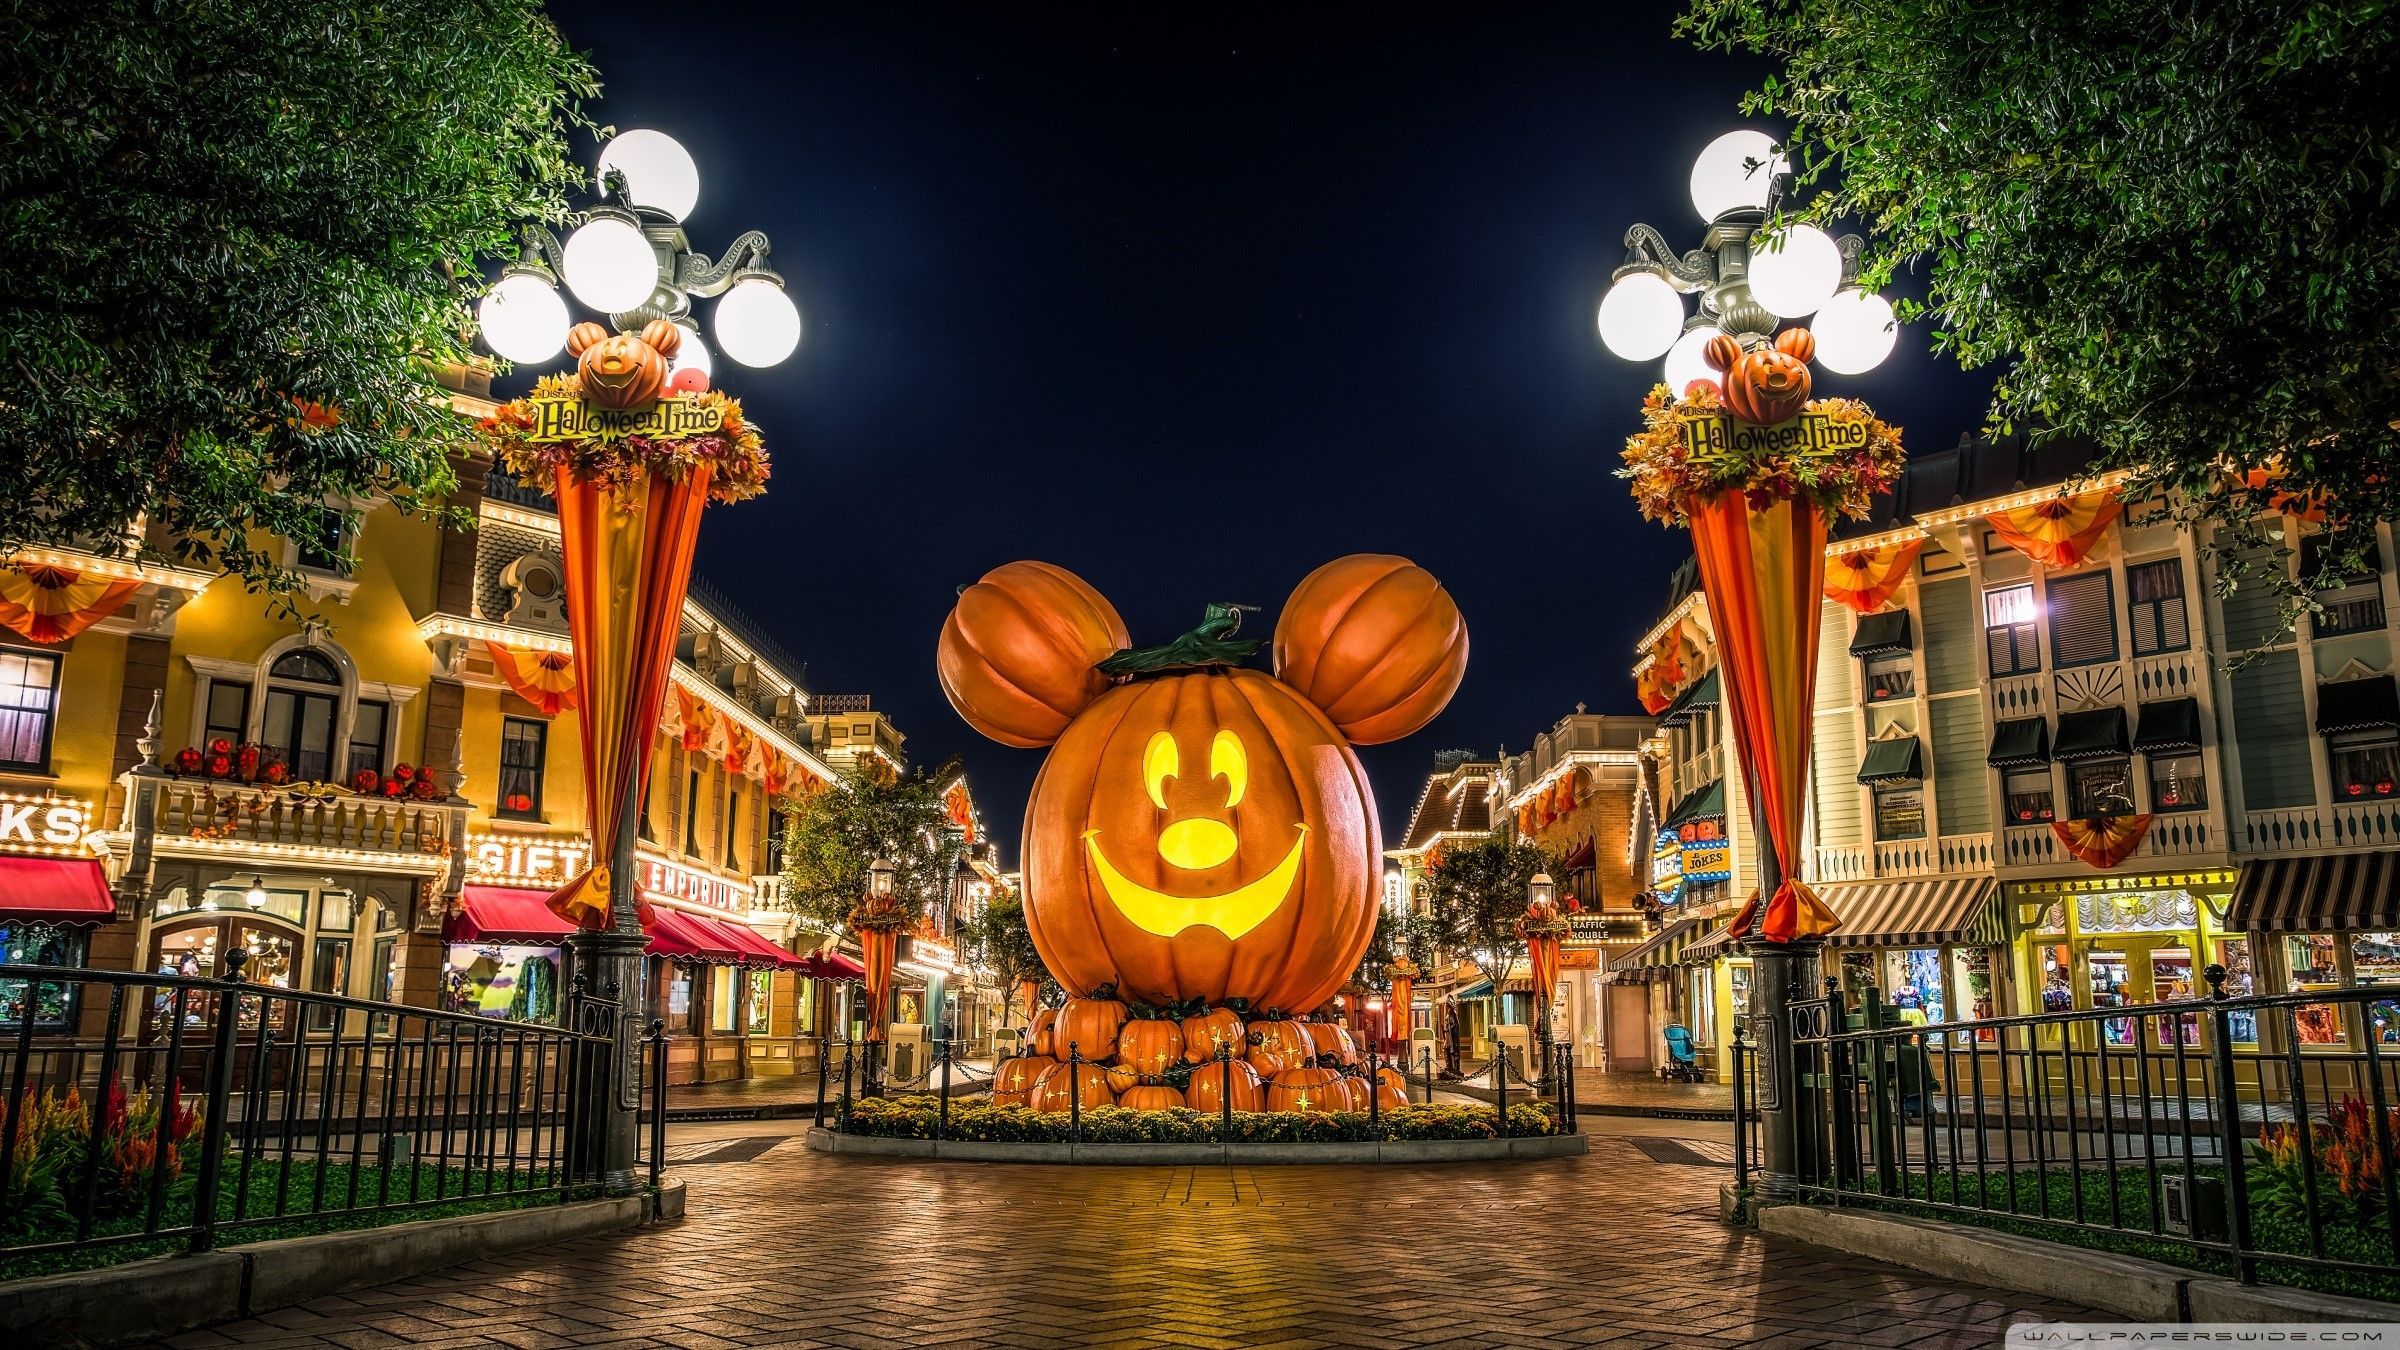 Halloween celebration in the city with a giant pumpkin - Disneyland